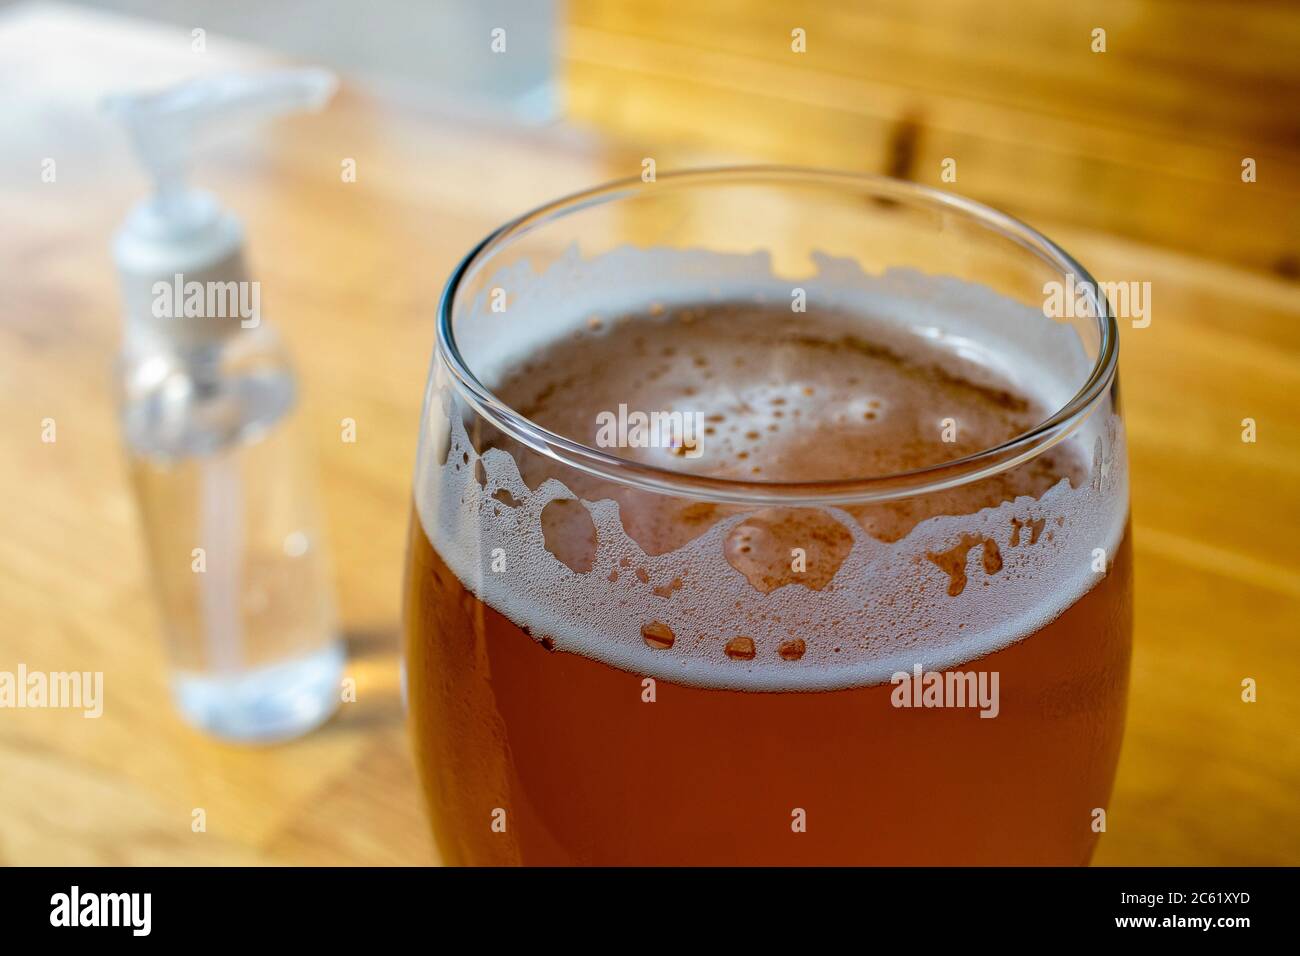 Close up on a IPA Beer Glass with Hand Sanitizer Gel Pump Bottle aside in a reopened bar during COVID-19 Coronavirus Pandemic reopening Stock Photo